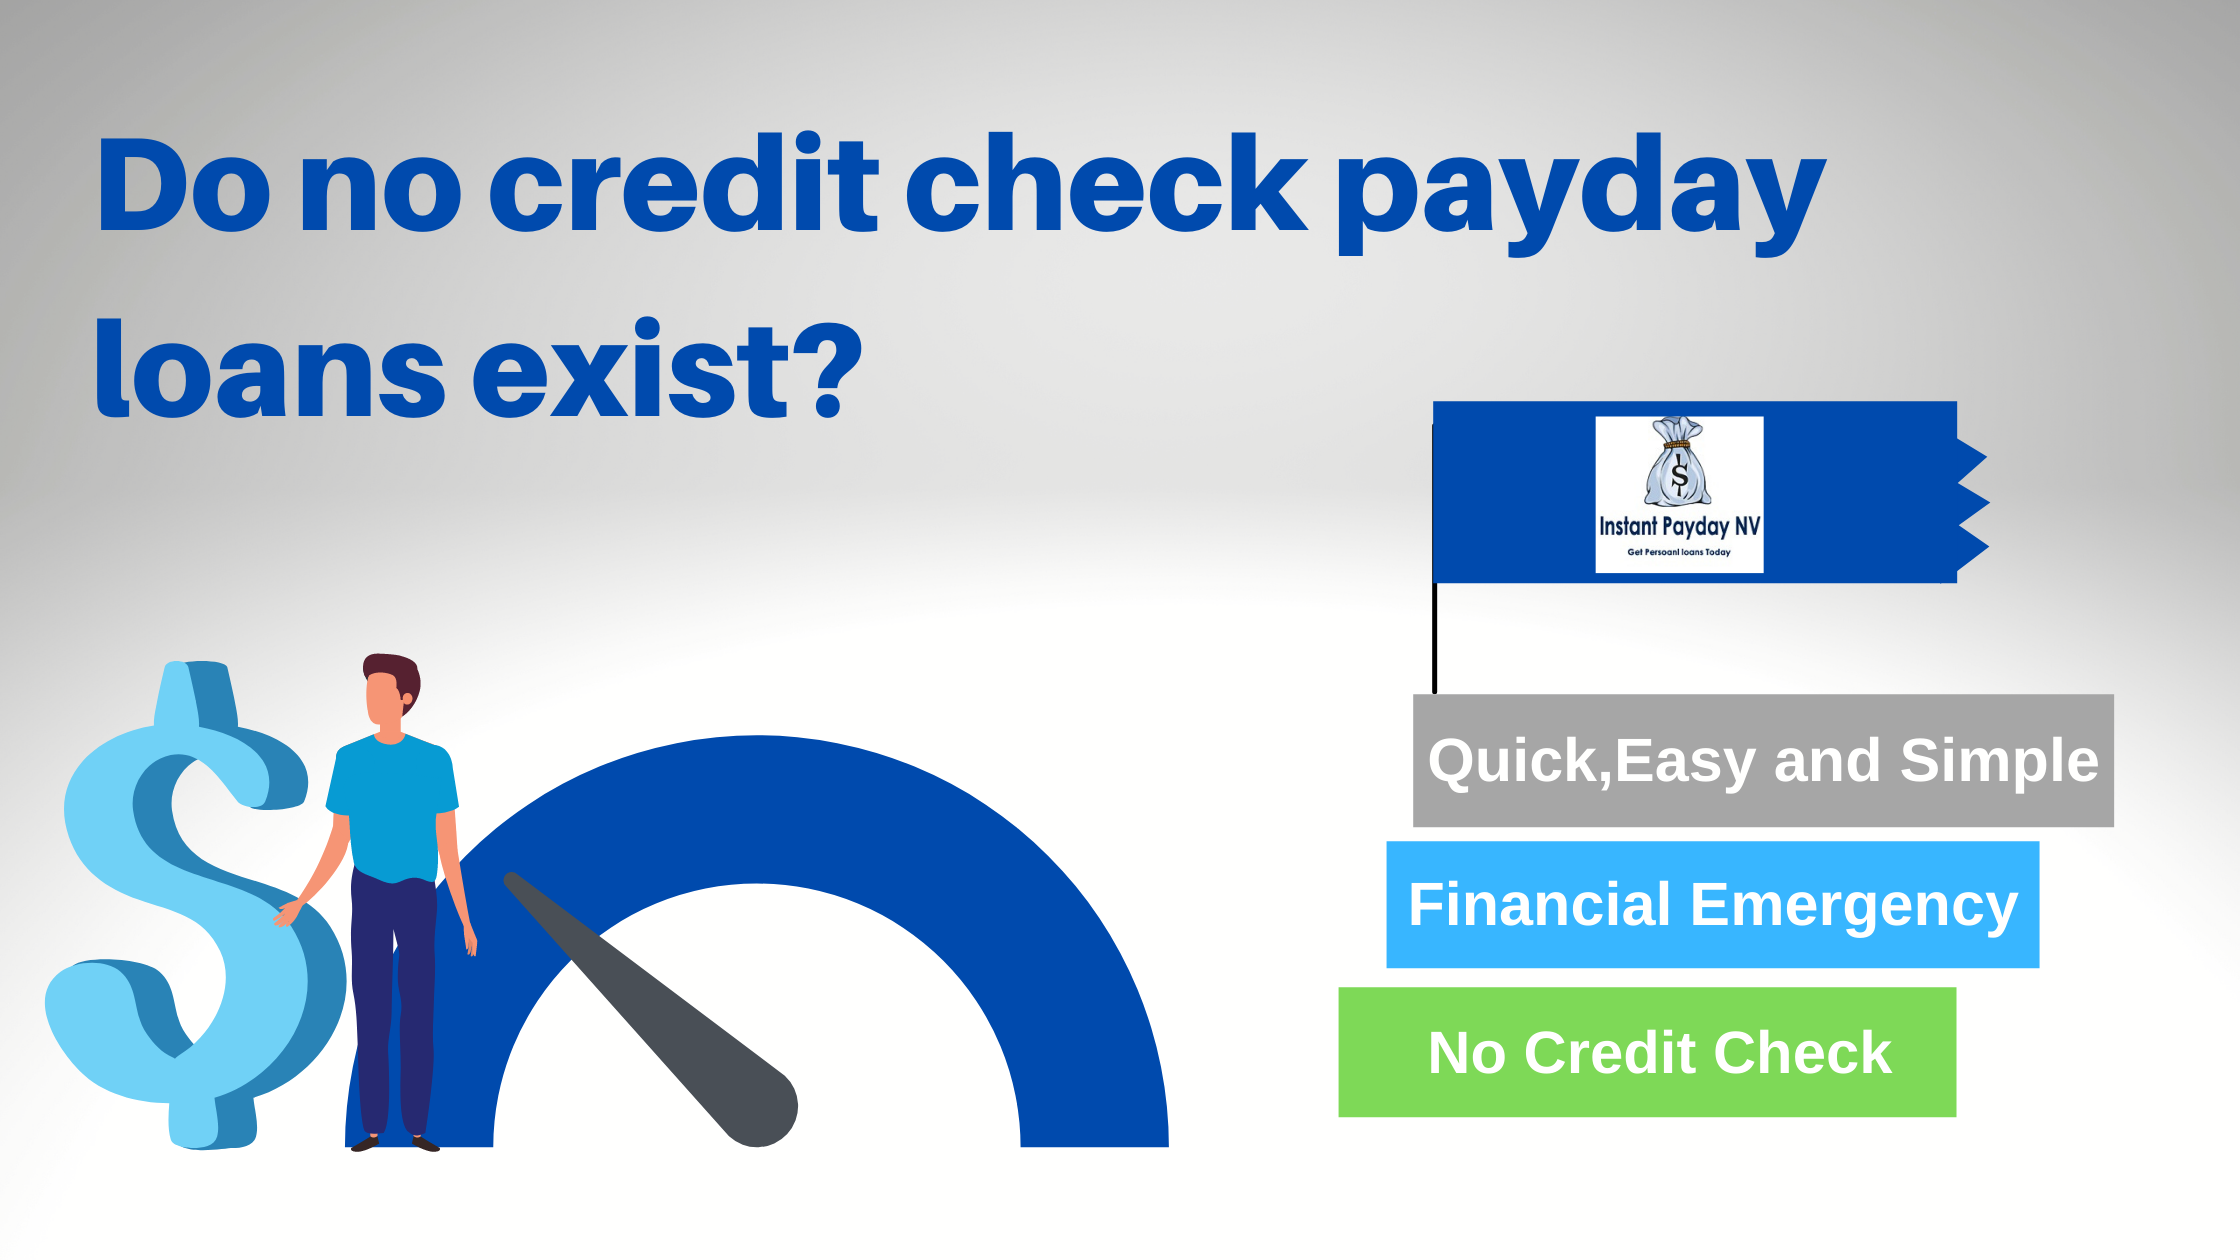 Do no credit check payday loans exist